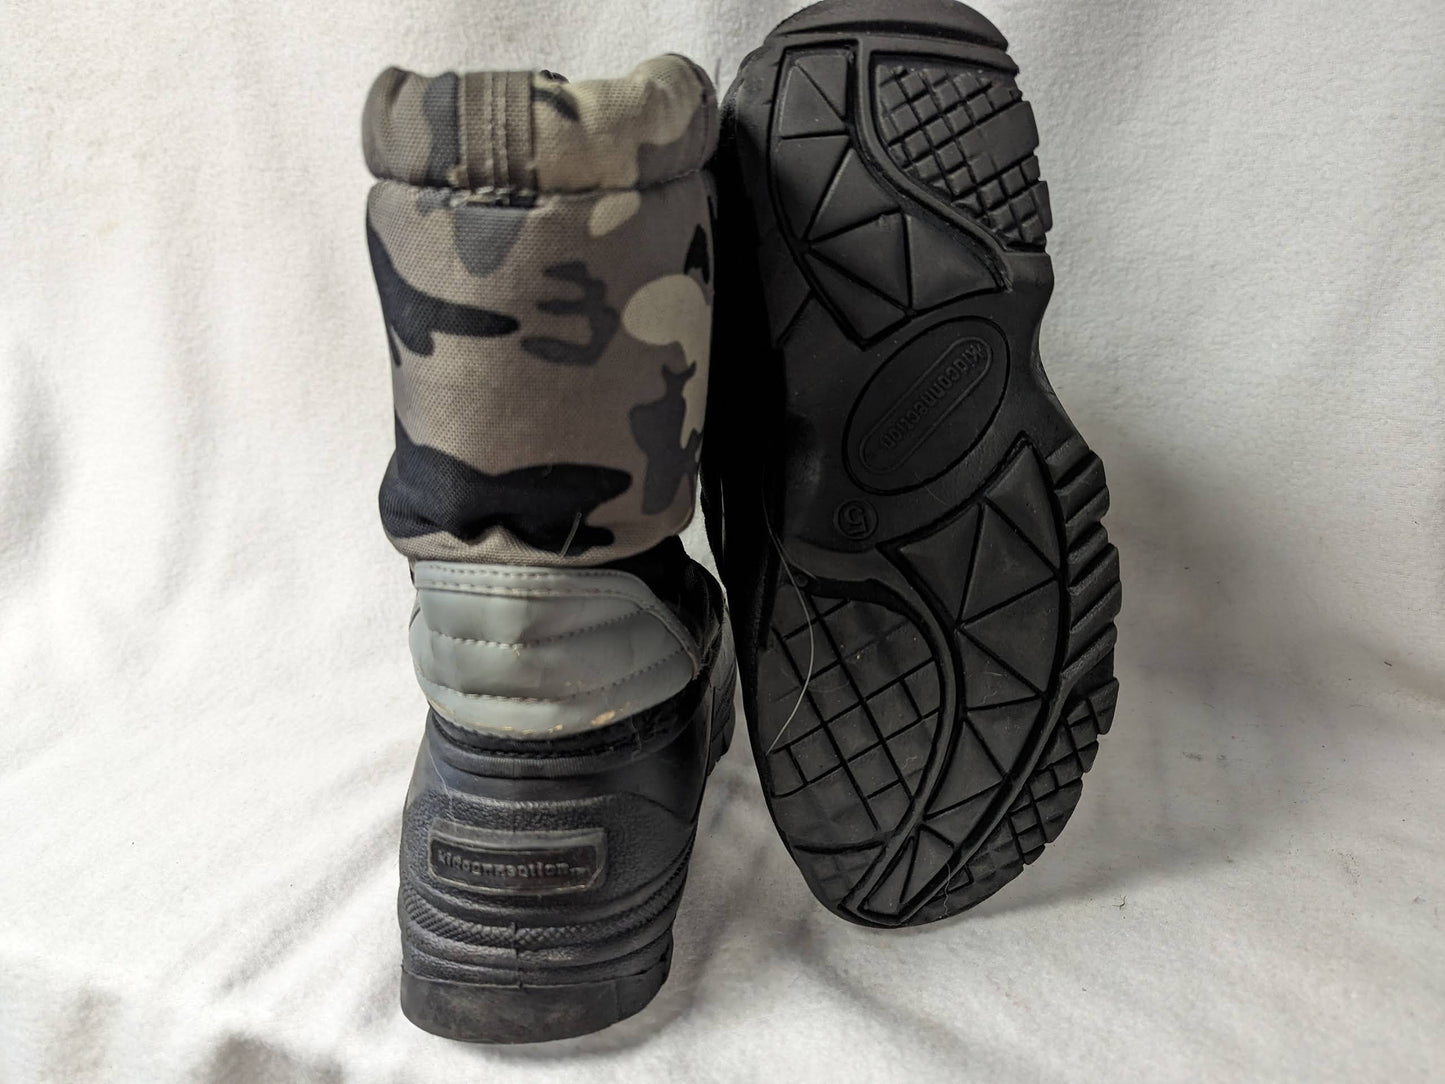 Kidconnection Insulated Snow Boots Size 5 Color Camo Condition Used